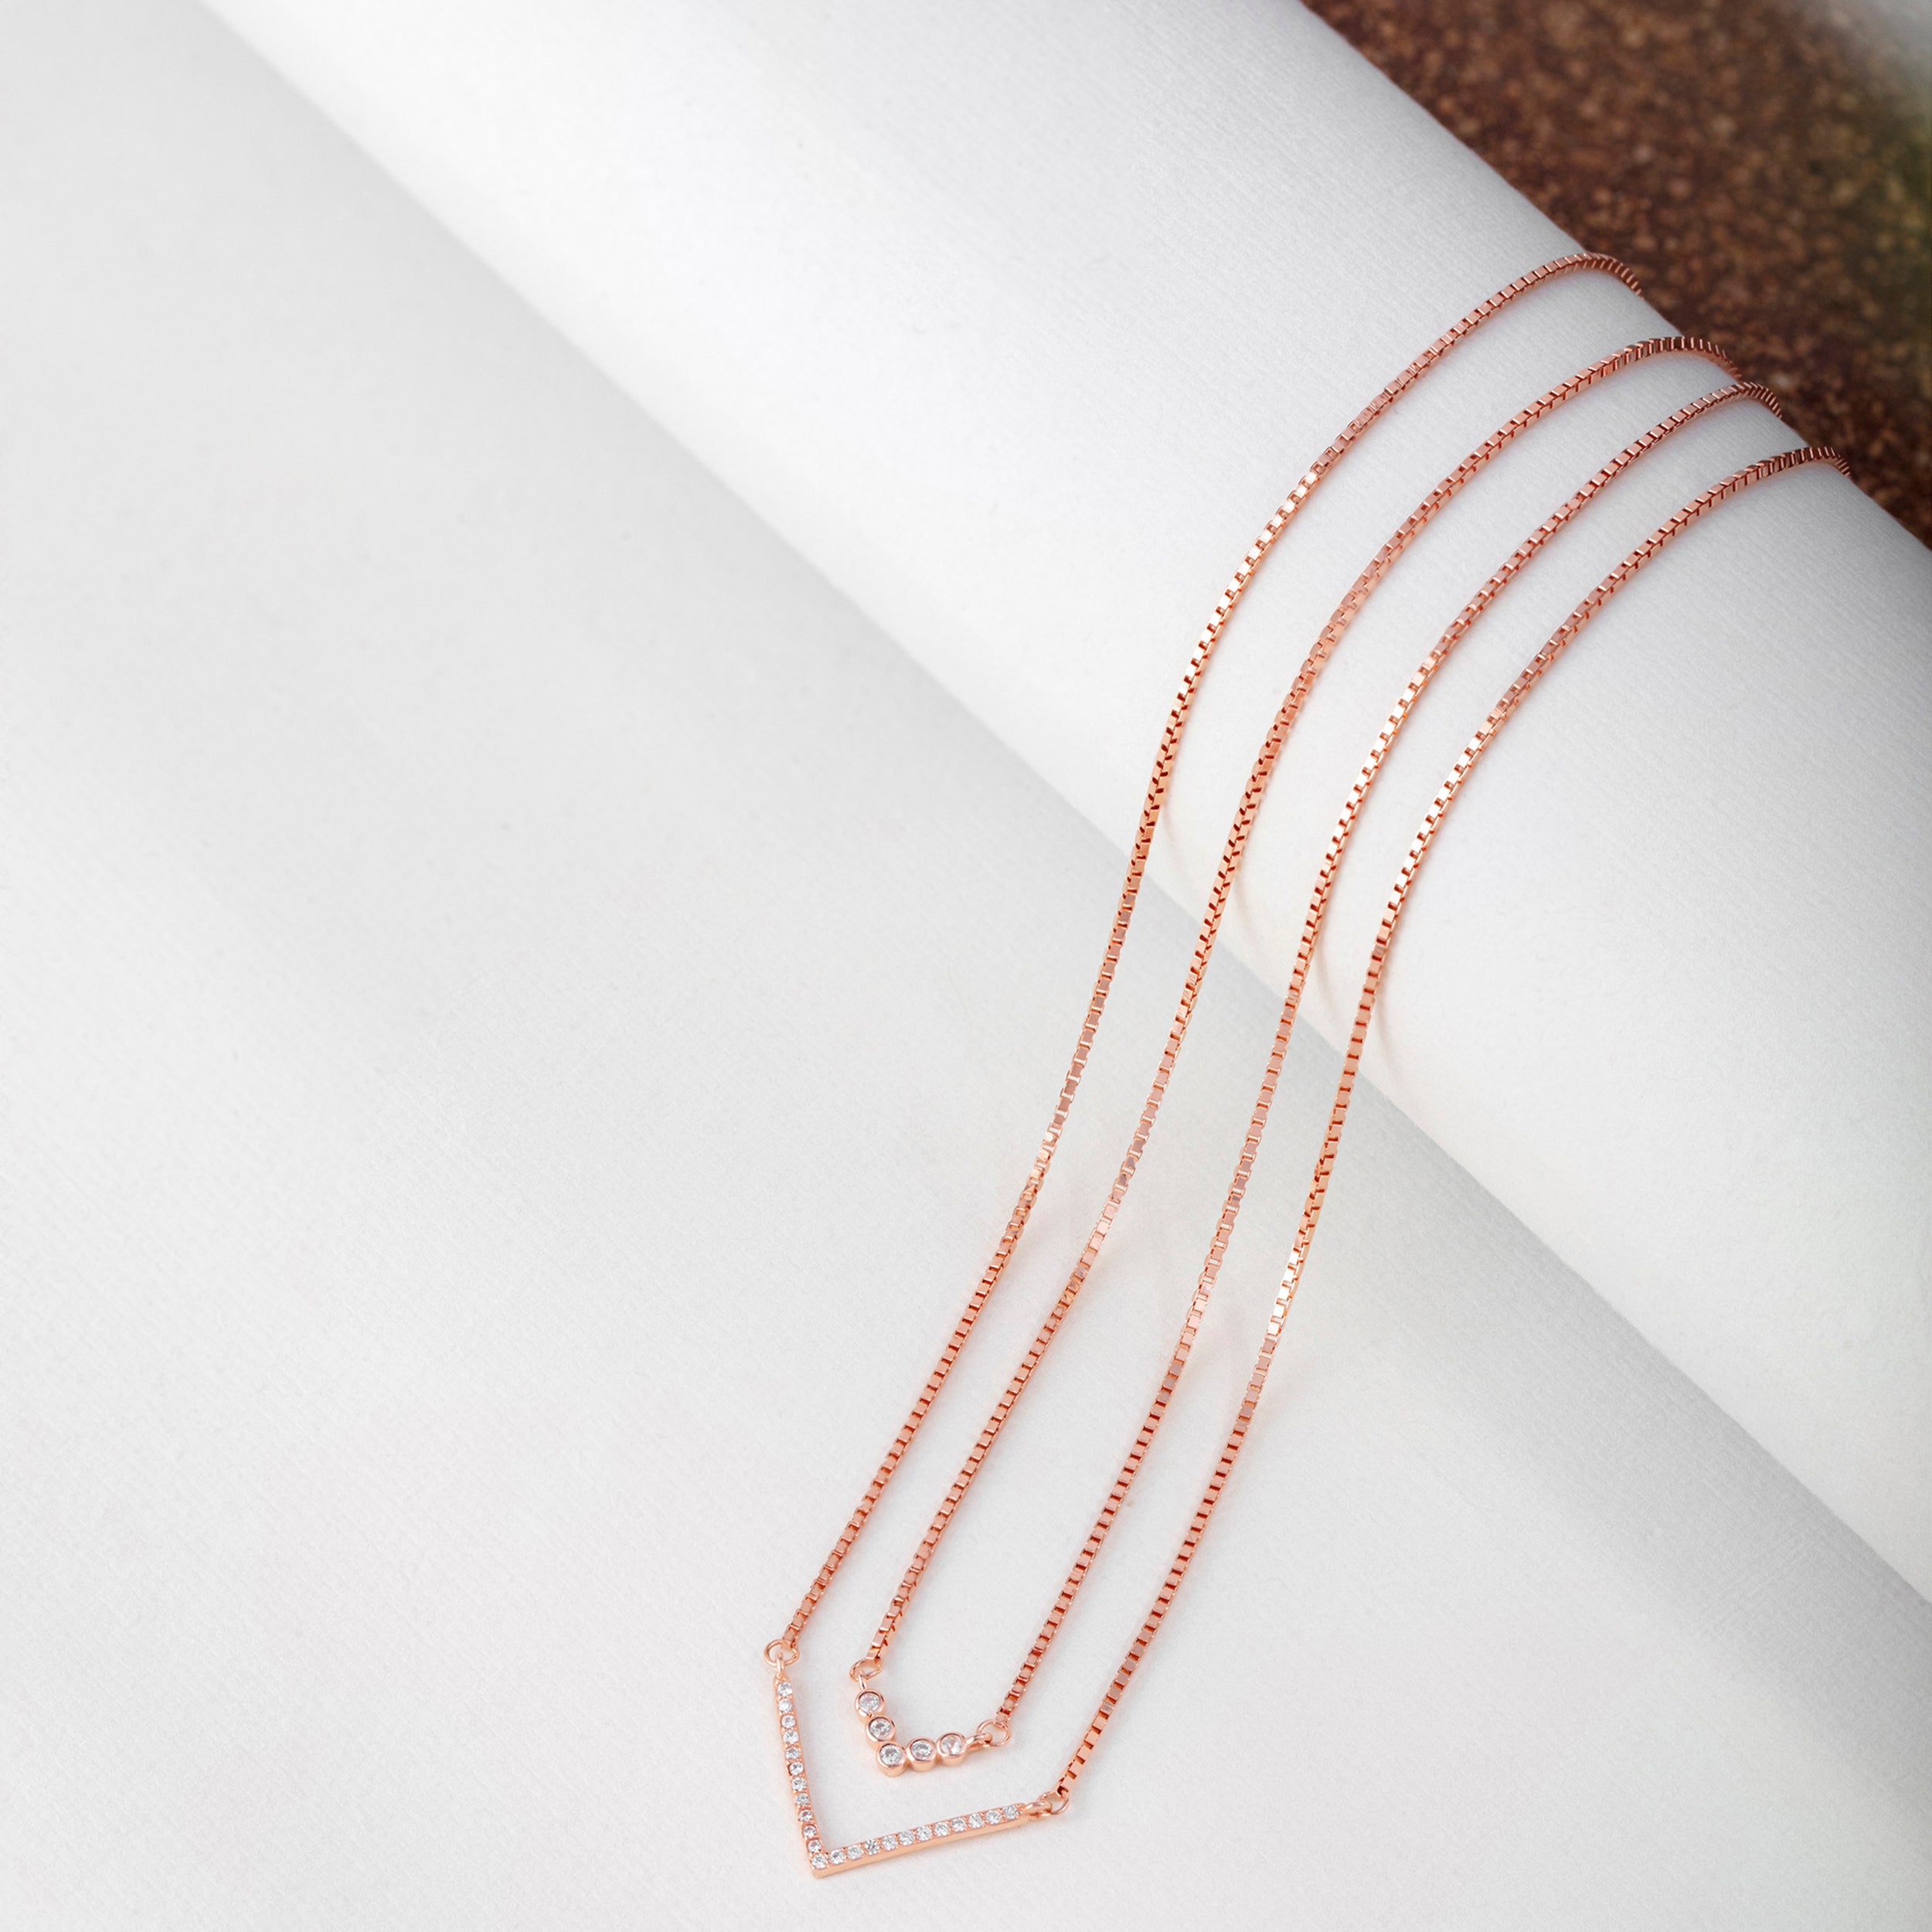 Radiant Fusion: Rose Gold and Silver Layered Chain | SKU: 0019281872, 0019271965